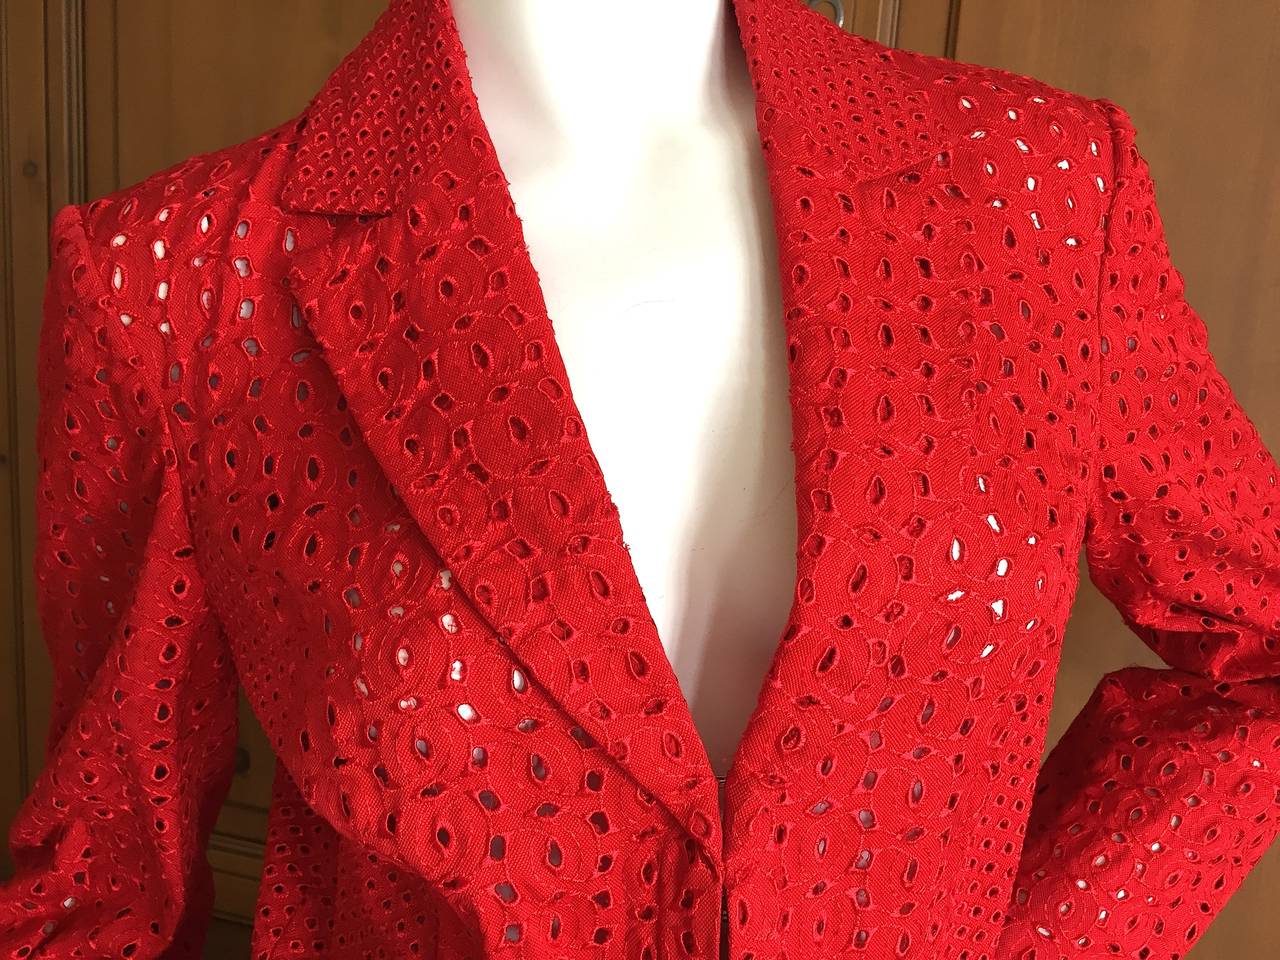 Gianni Versace Couture Vintage Red Embroidered Eyelet Jacket In Excellent Condition For Sale In Cloverdale, CA